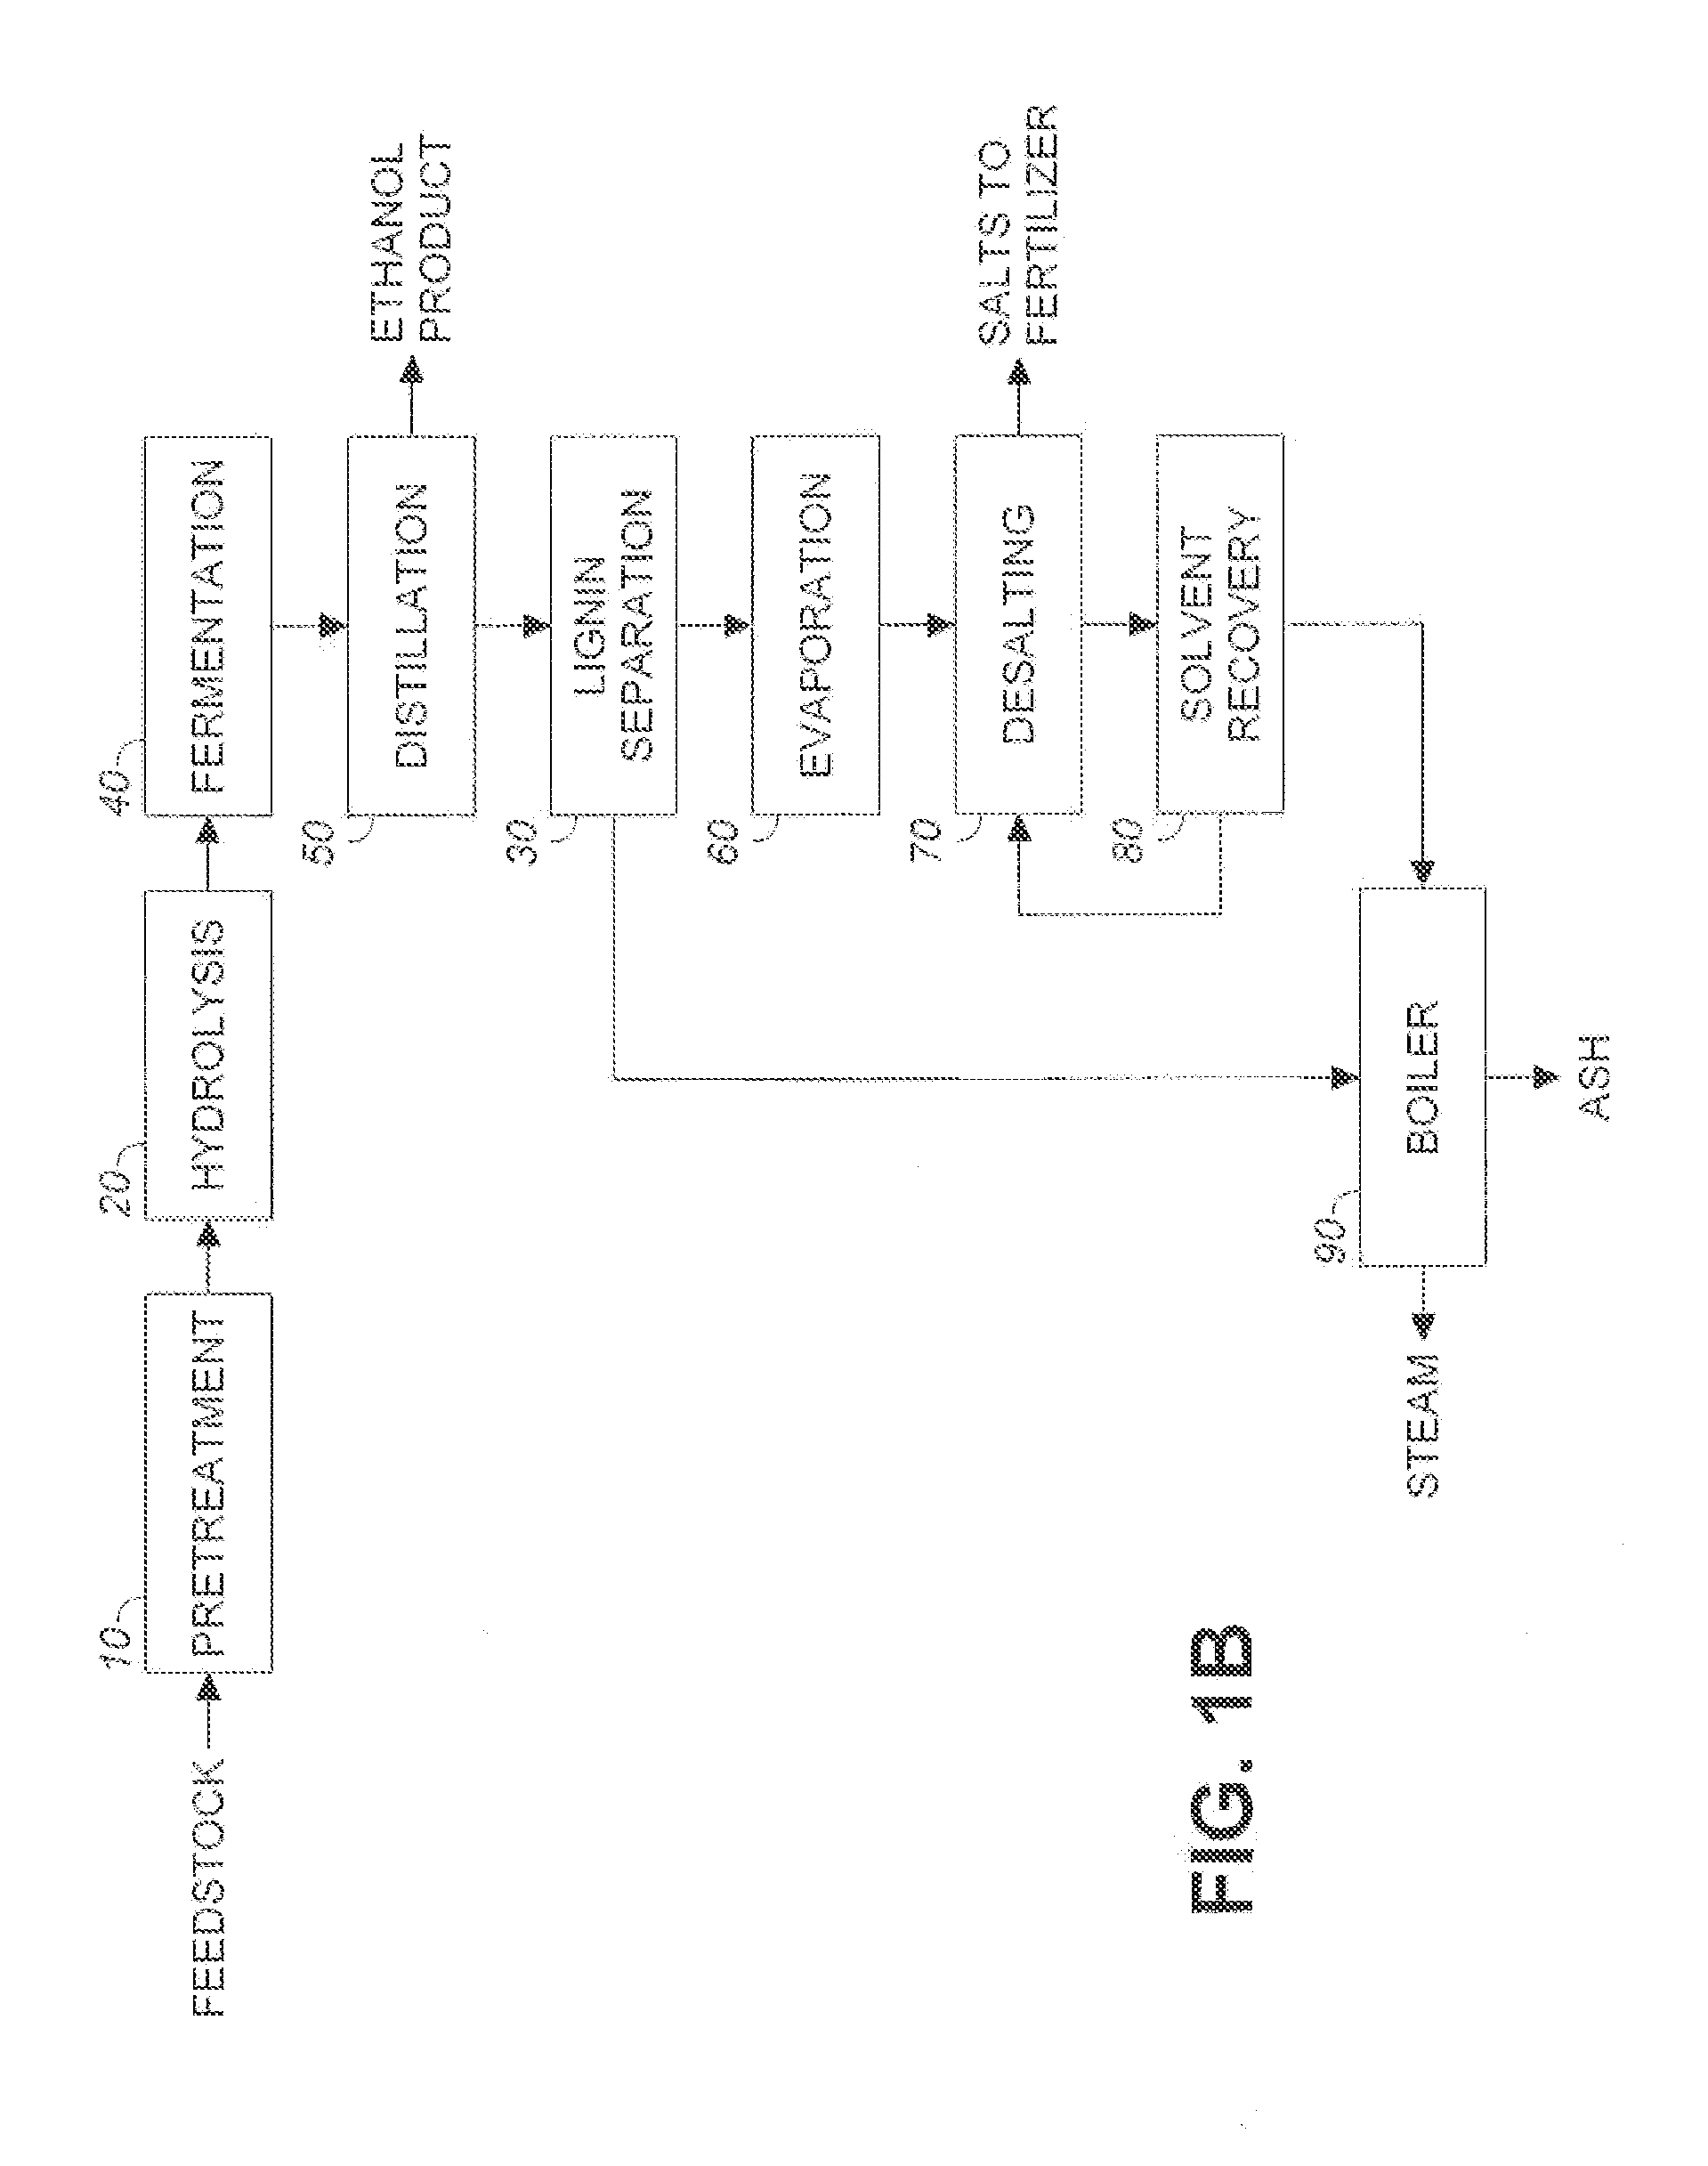 Process for recovering salt during a lignocellulosic conversion process